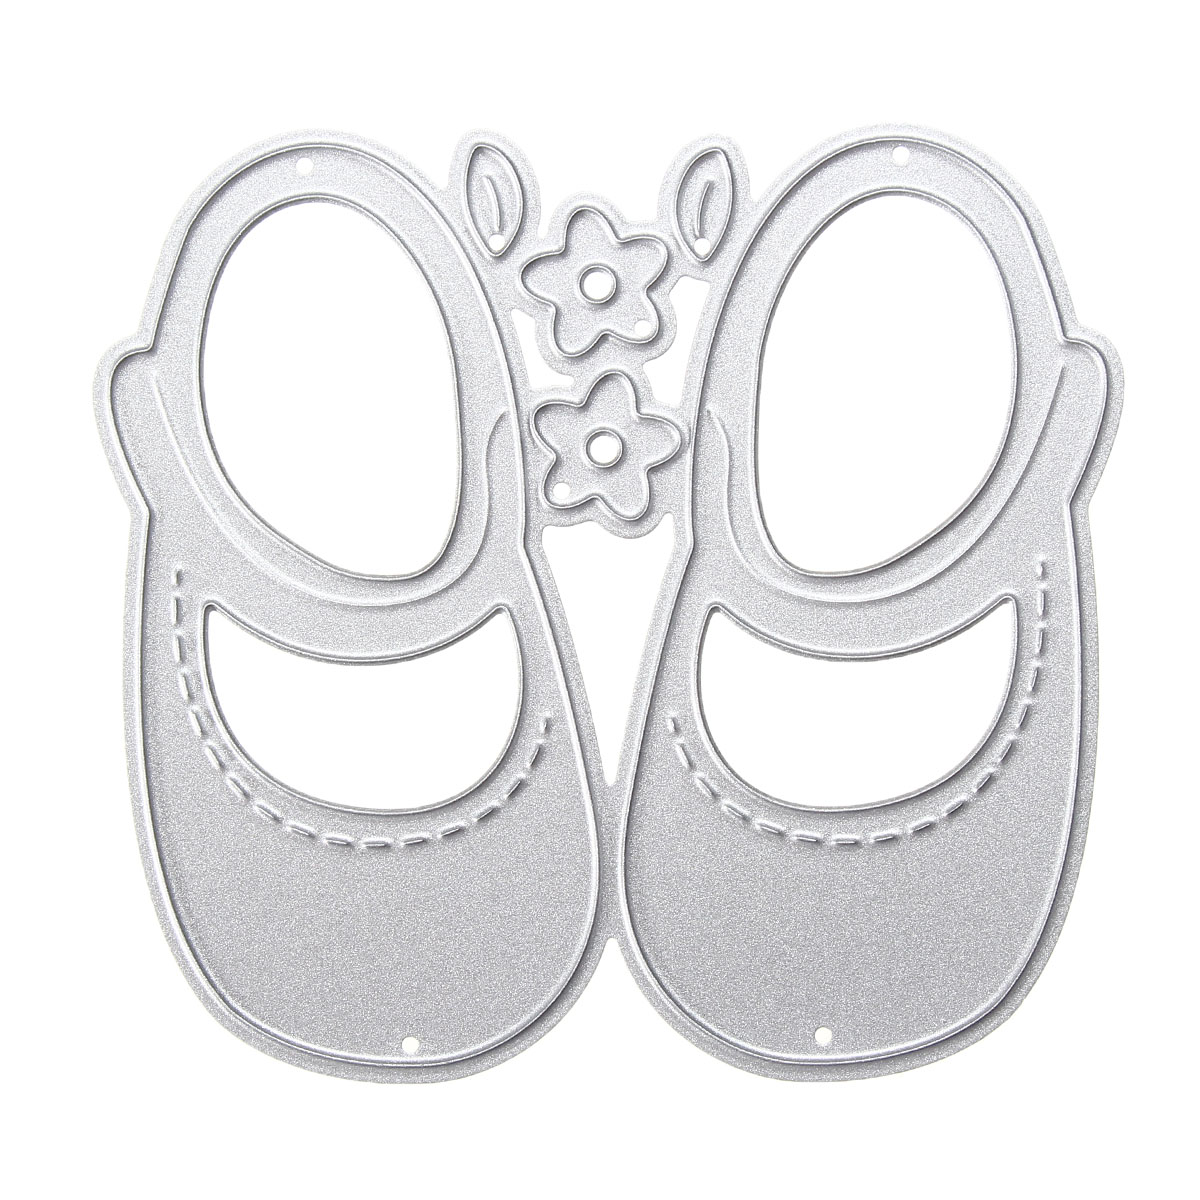 Find Baby shoes Metal Cutting Dies DIY Album Frame Scrapbooking Maker Stencils Embossing Card DIY Gift for Sale on Gipsybee.com with cryptocurrencies